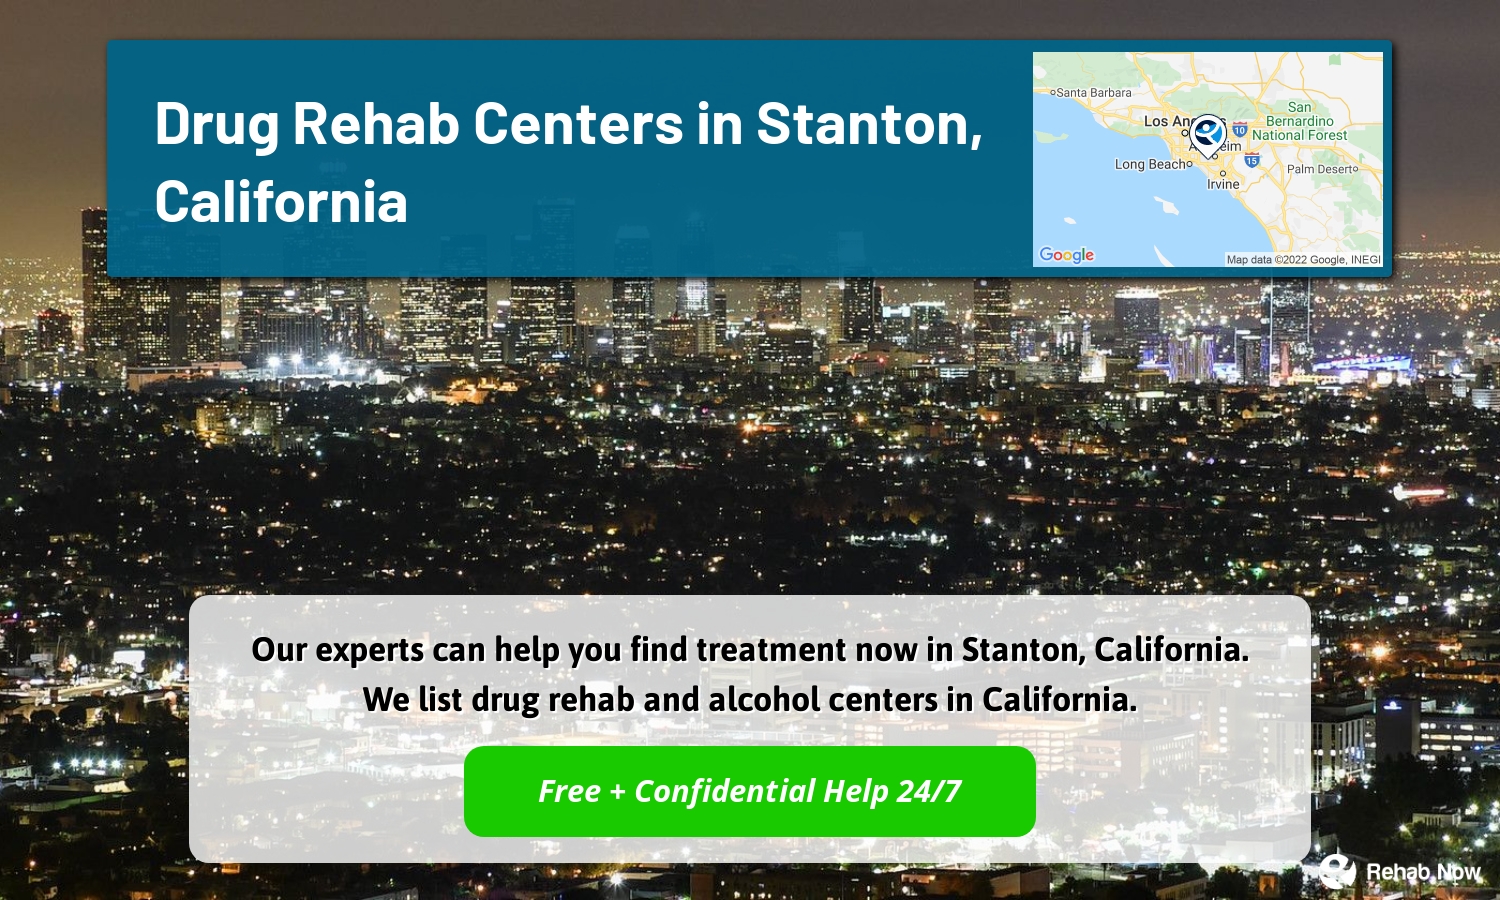 Our experts can help you find treatment now in Stanton, California. We list drug rehab and alcohol centers in California.